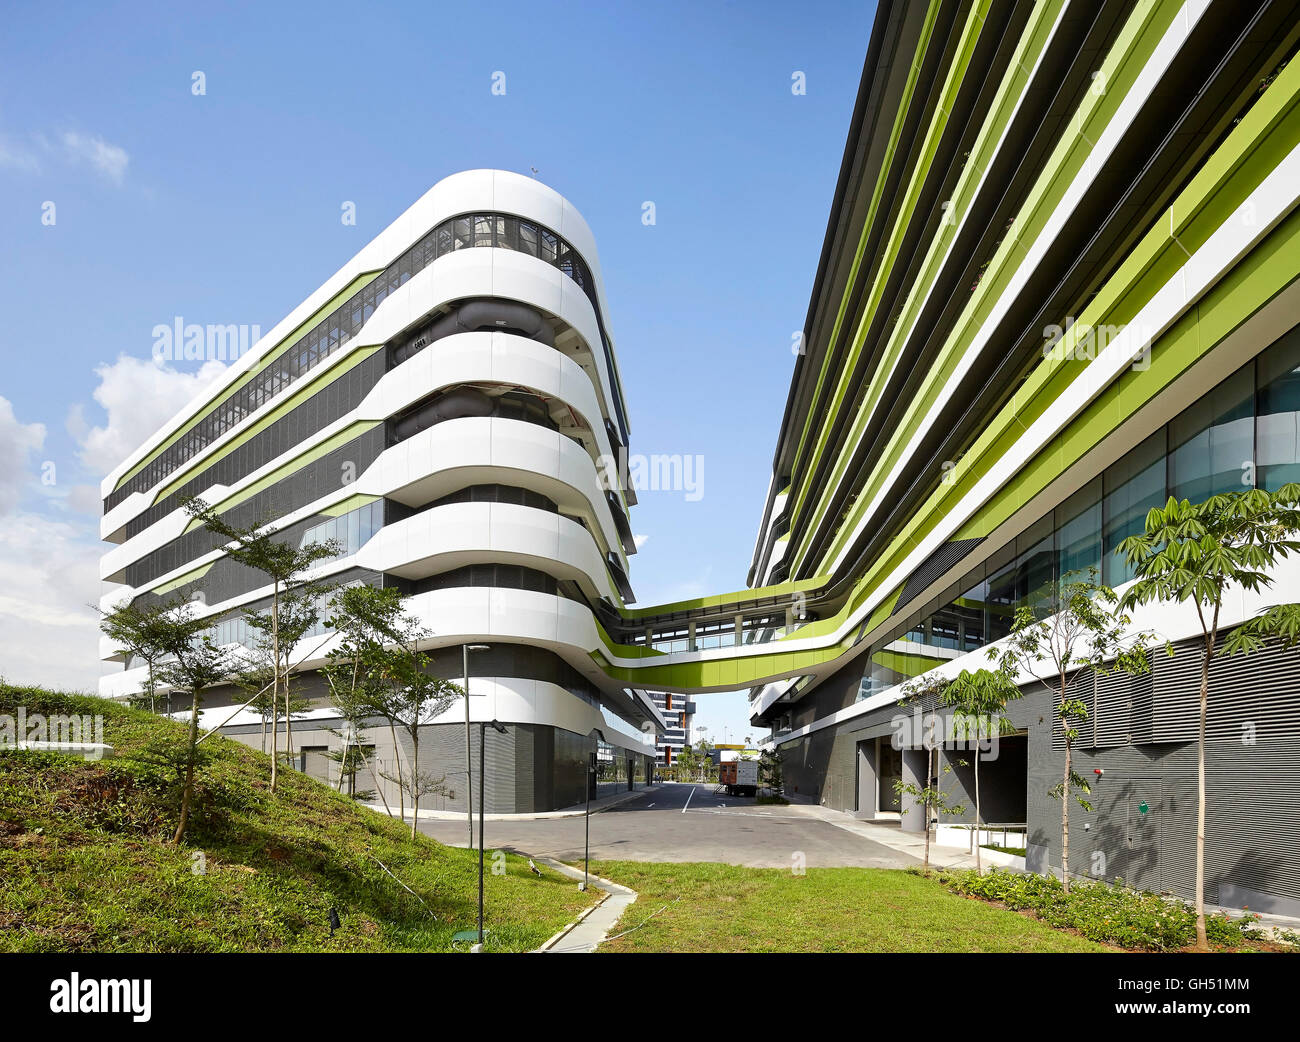 Facade perspective in loading bay area. Singapore University of Technology and Design, Singapore, Singapore. Architect: UNStudio, 2015. Stock Photo